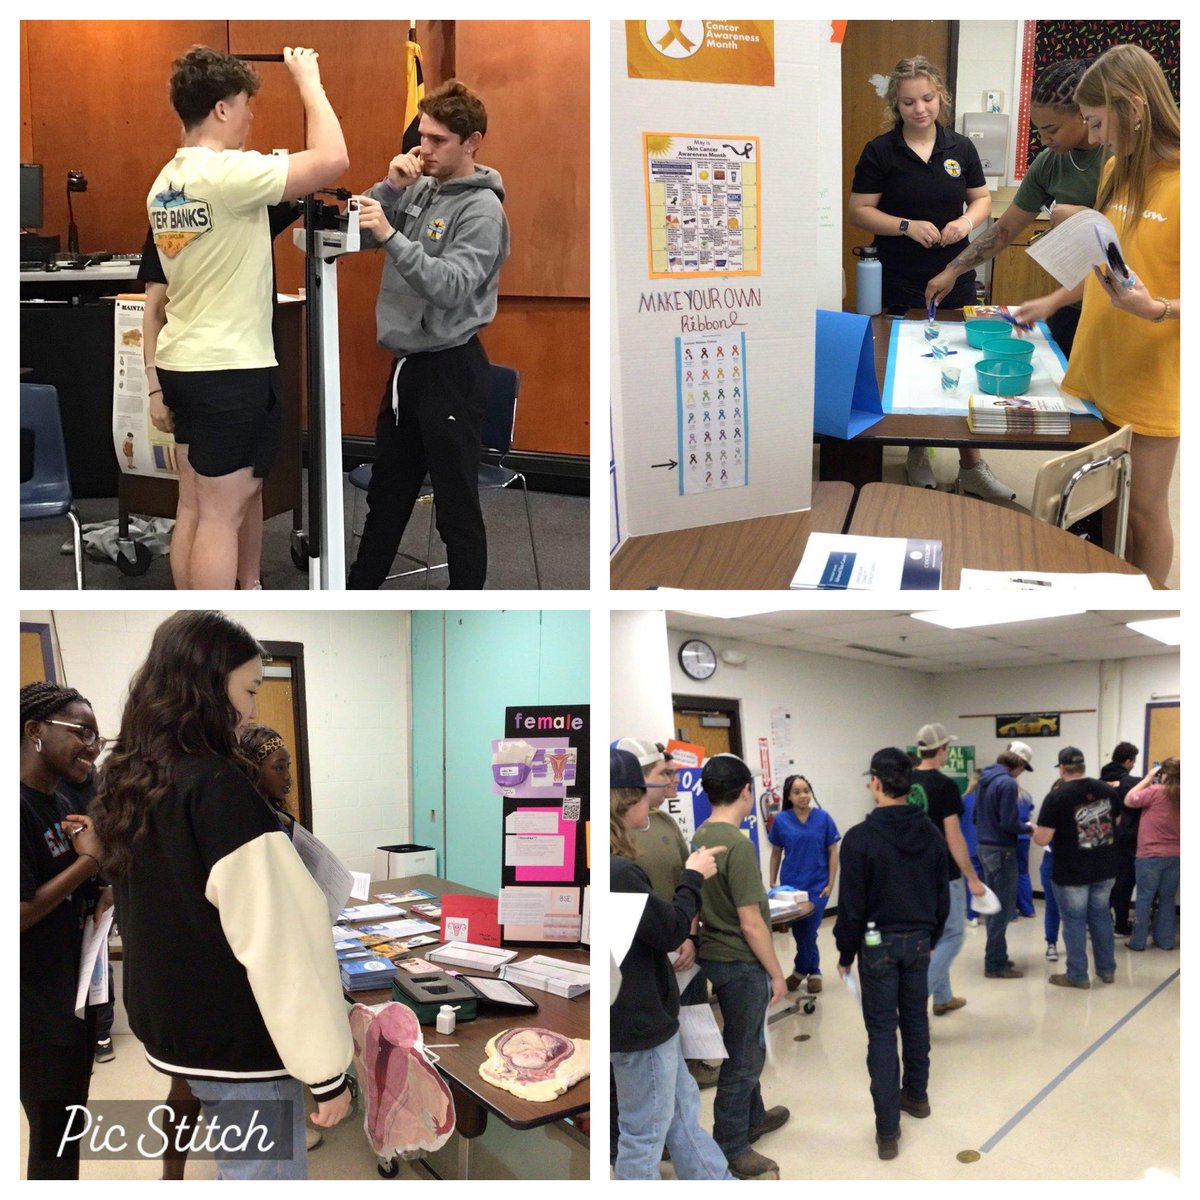 Shout out to the students and staff who participated in and facilitated the annual Health & Wellness Fair at CTC over the last 3 days. You were AWESOME!!! @FrederickCTC @AohpCtc @CTC_MediaCenter @CTEKPearl @FCPSMaryland